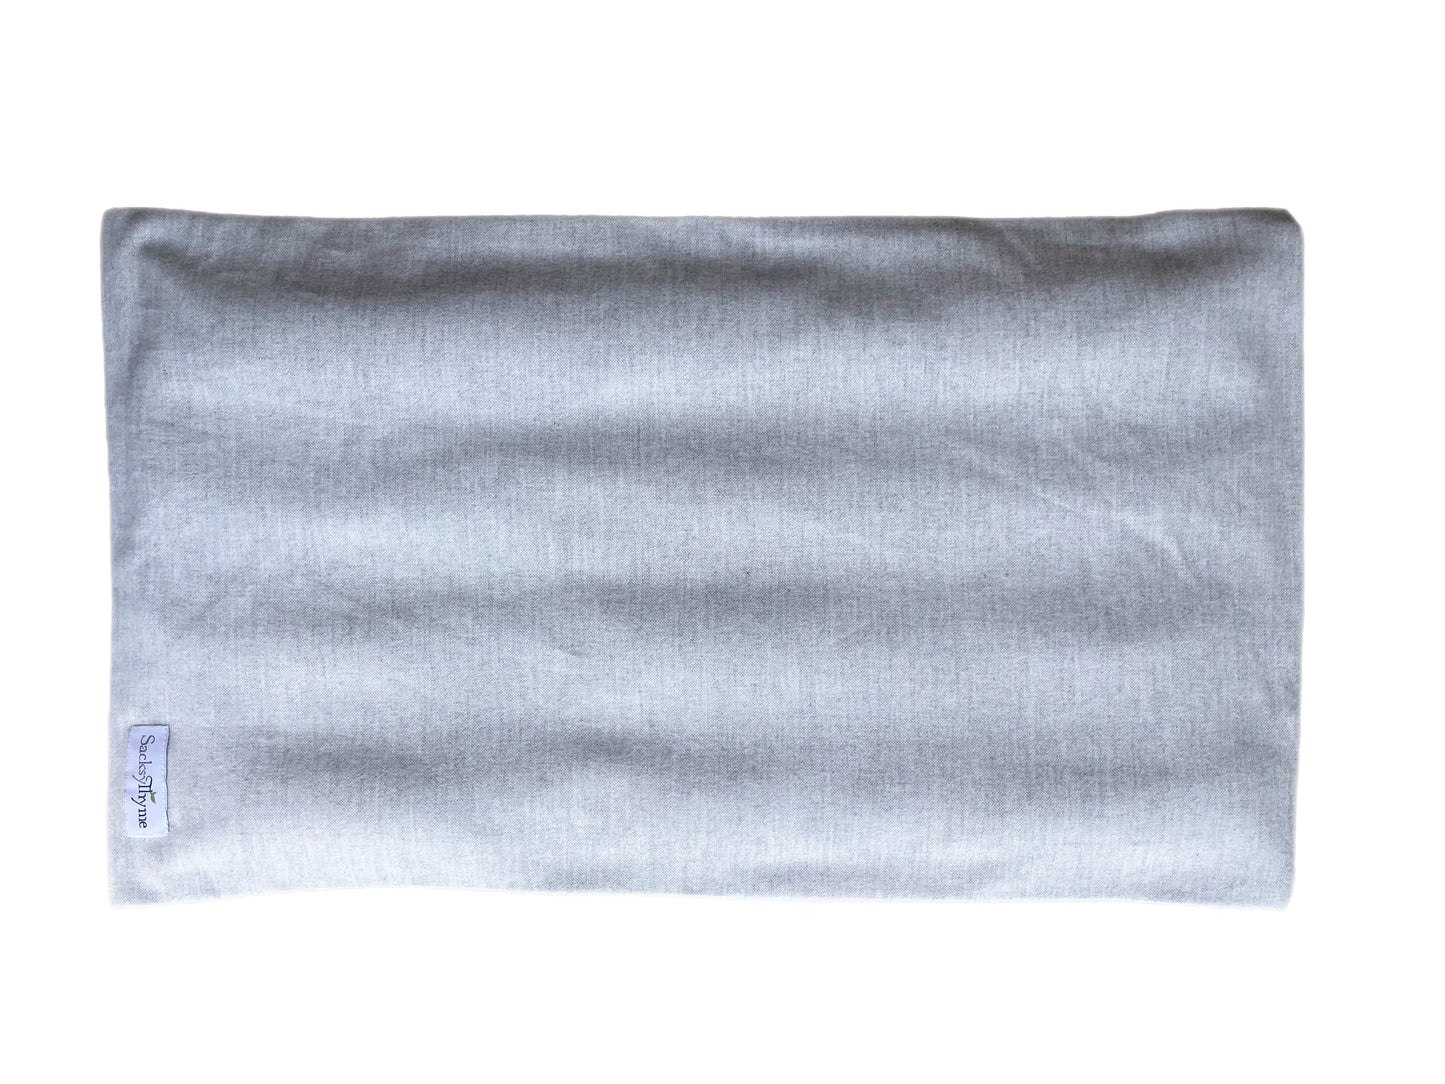 The Mondo Microwavable Heating Pad with Cover, 21" x 12"